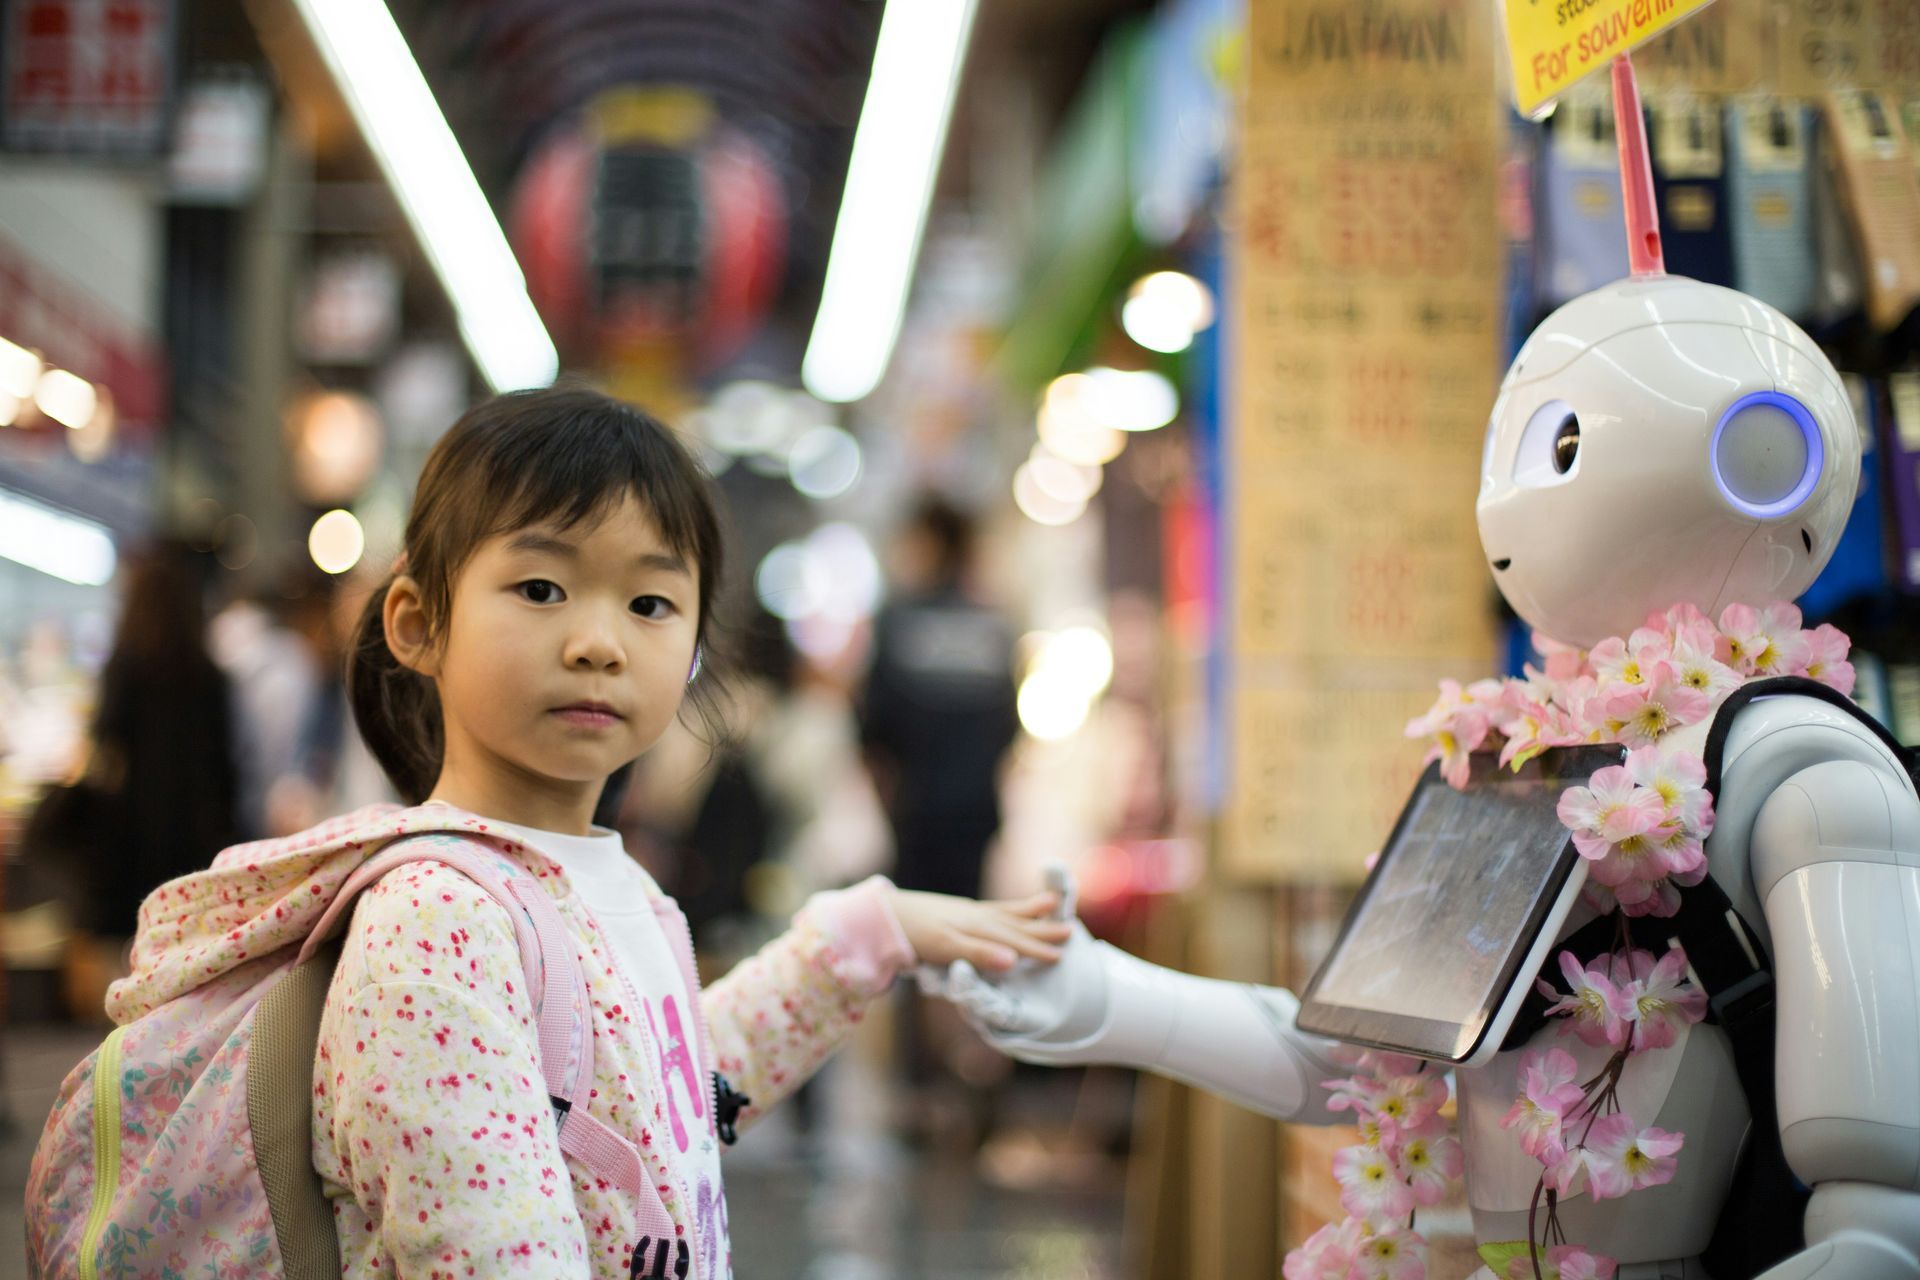 A little girl is shaking hands with a robot.